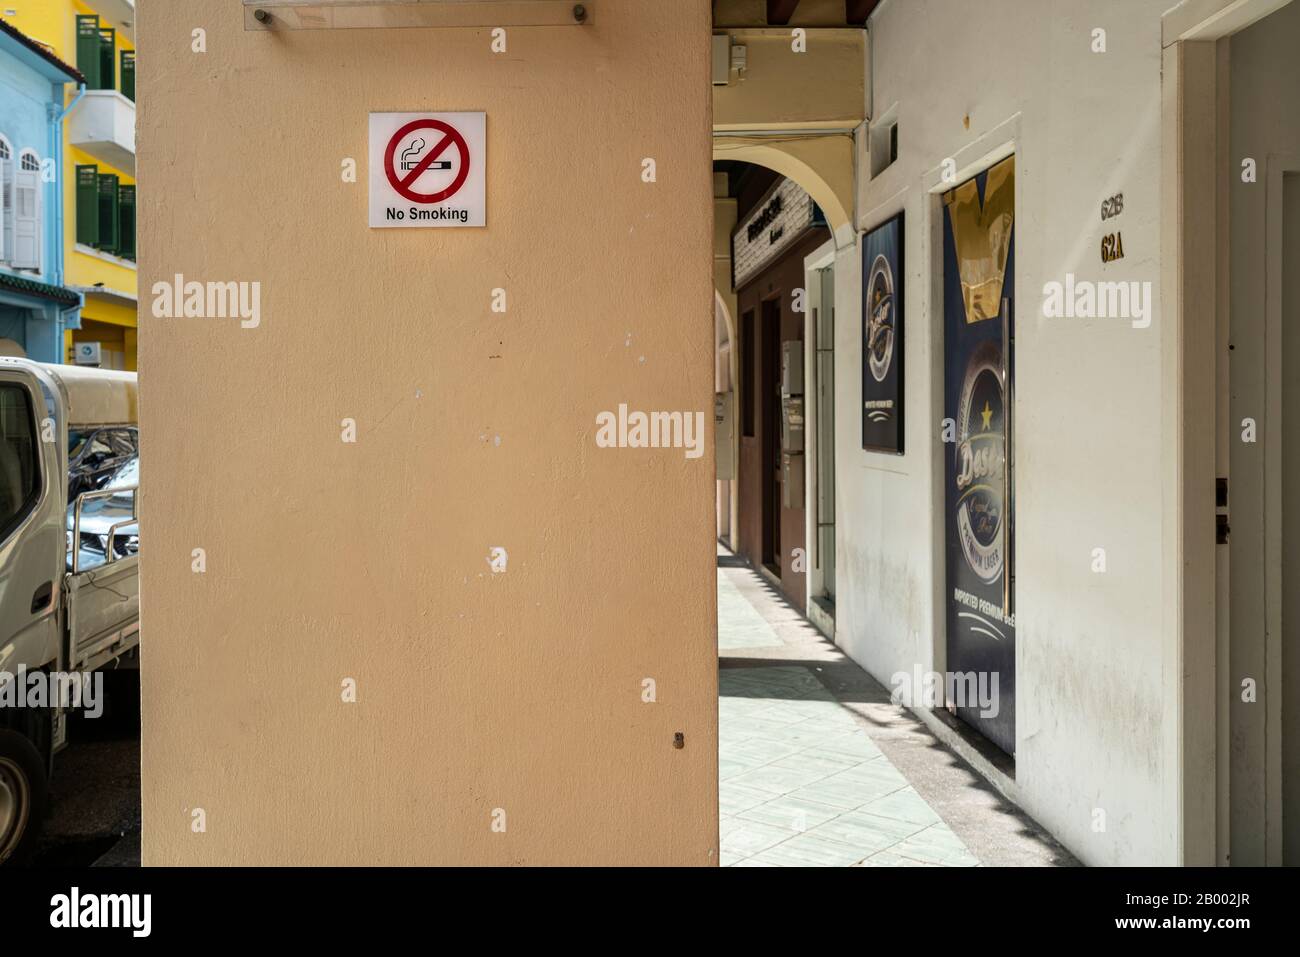 Singapore.  January 2020.  the No Smoking sign on a column in the street Stock Photo